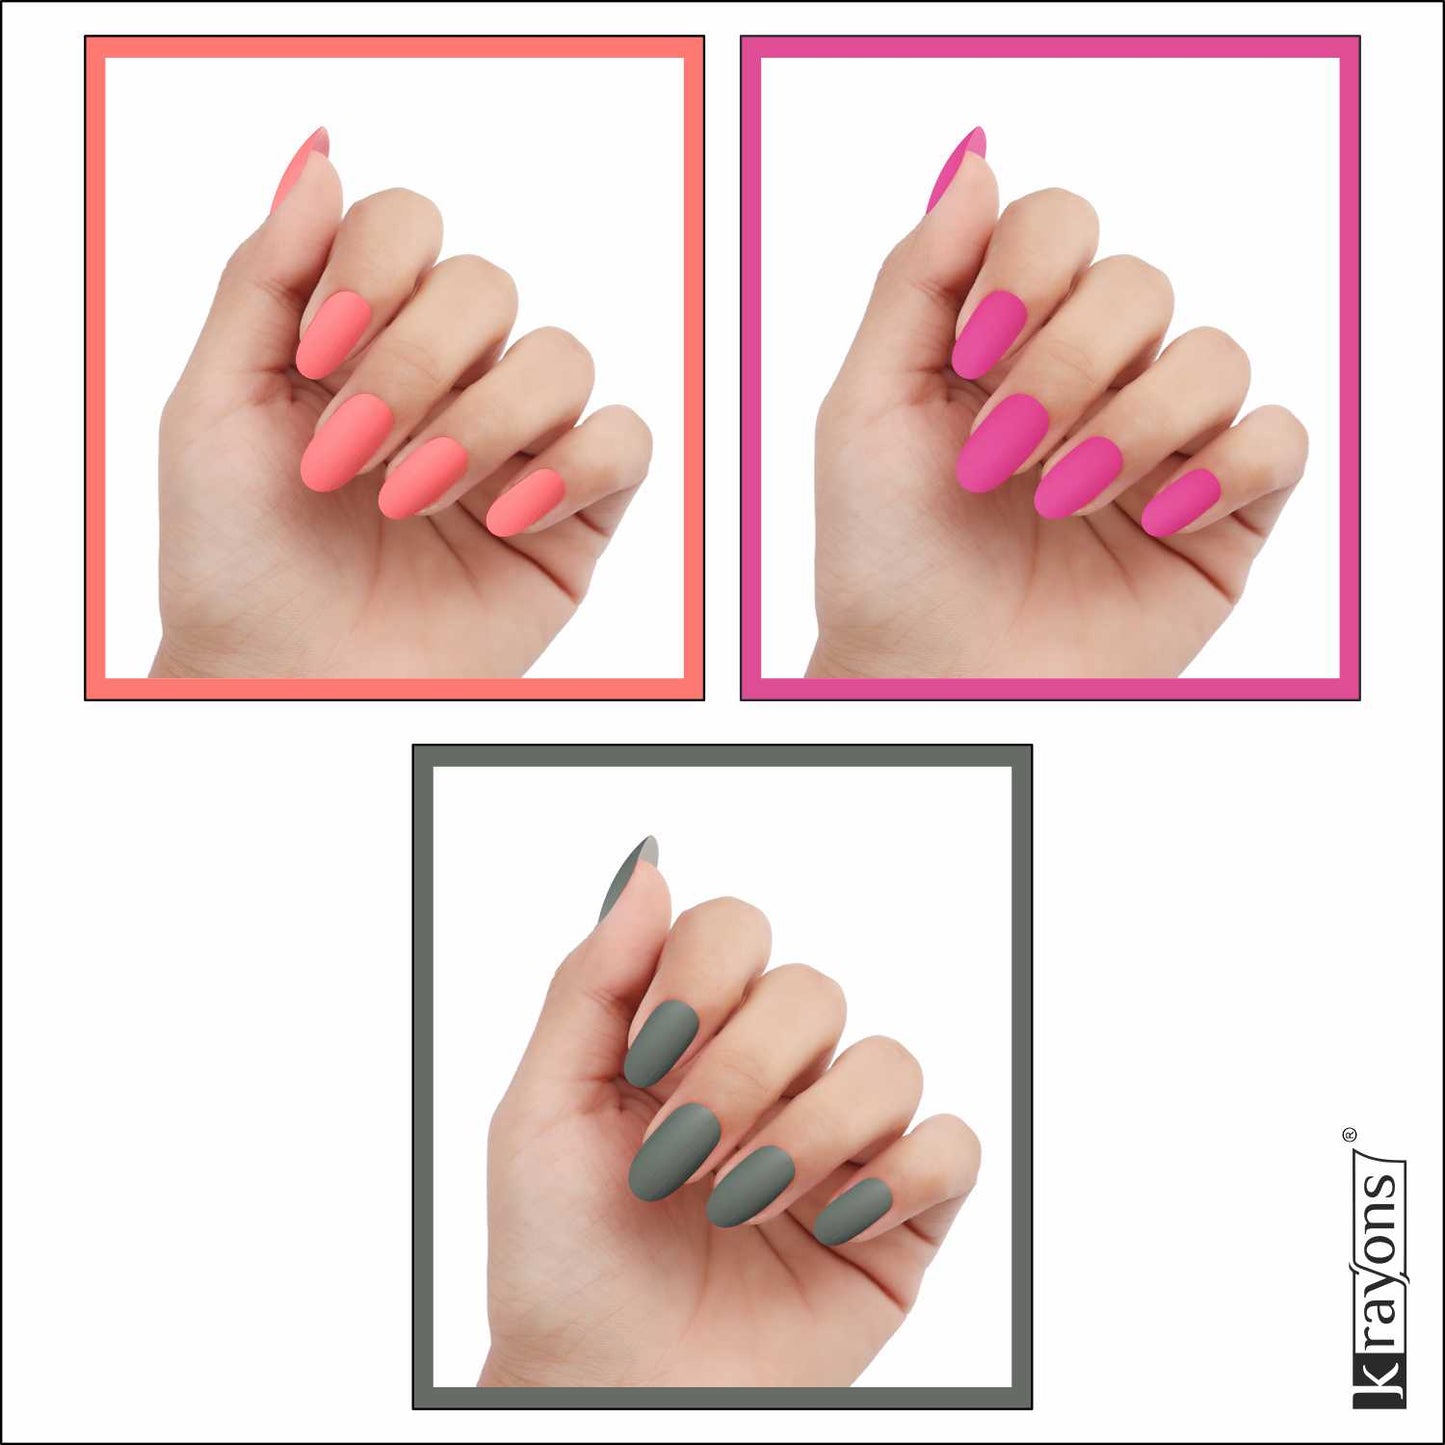 Krayons Cute Super Matte Finish Nail Enamel, Quick Dry, LongLasting, Blossom Peach, Hot Pink, Charcoal Grey, 6ml Each (Pack of 3)